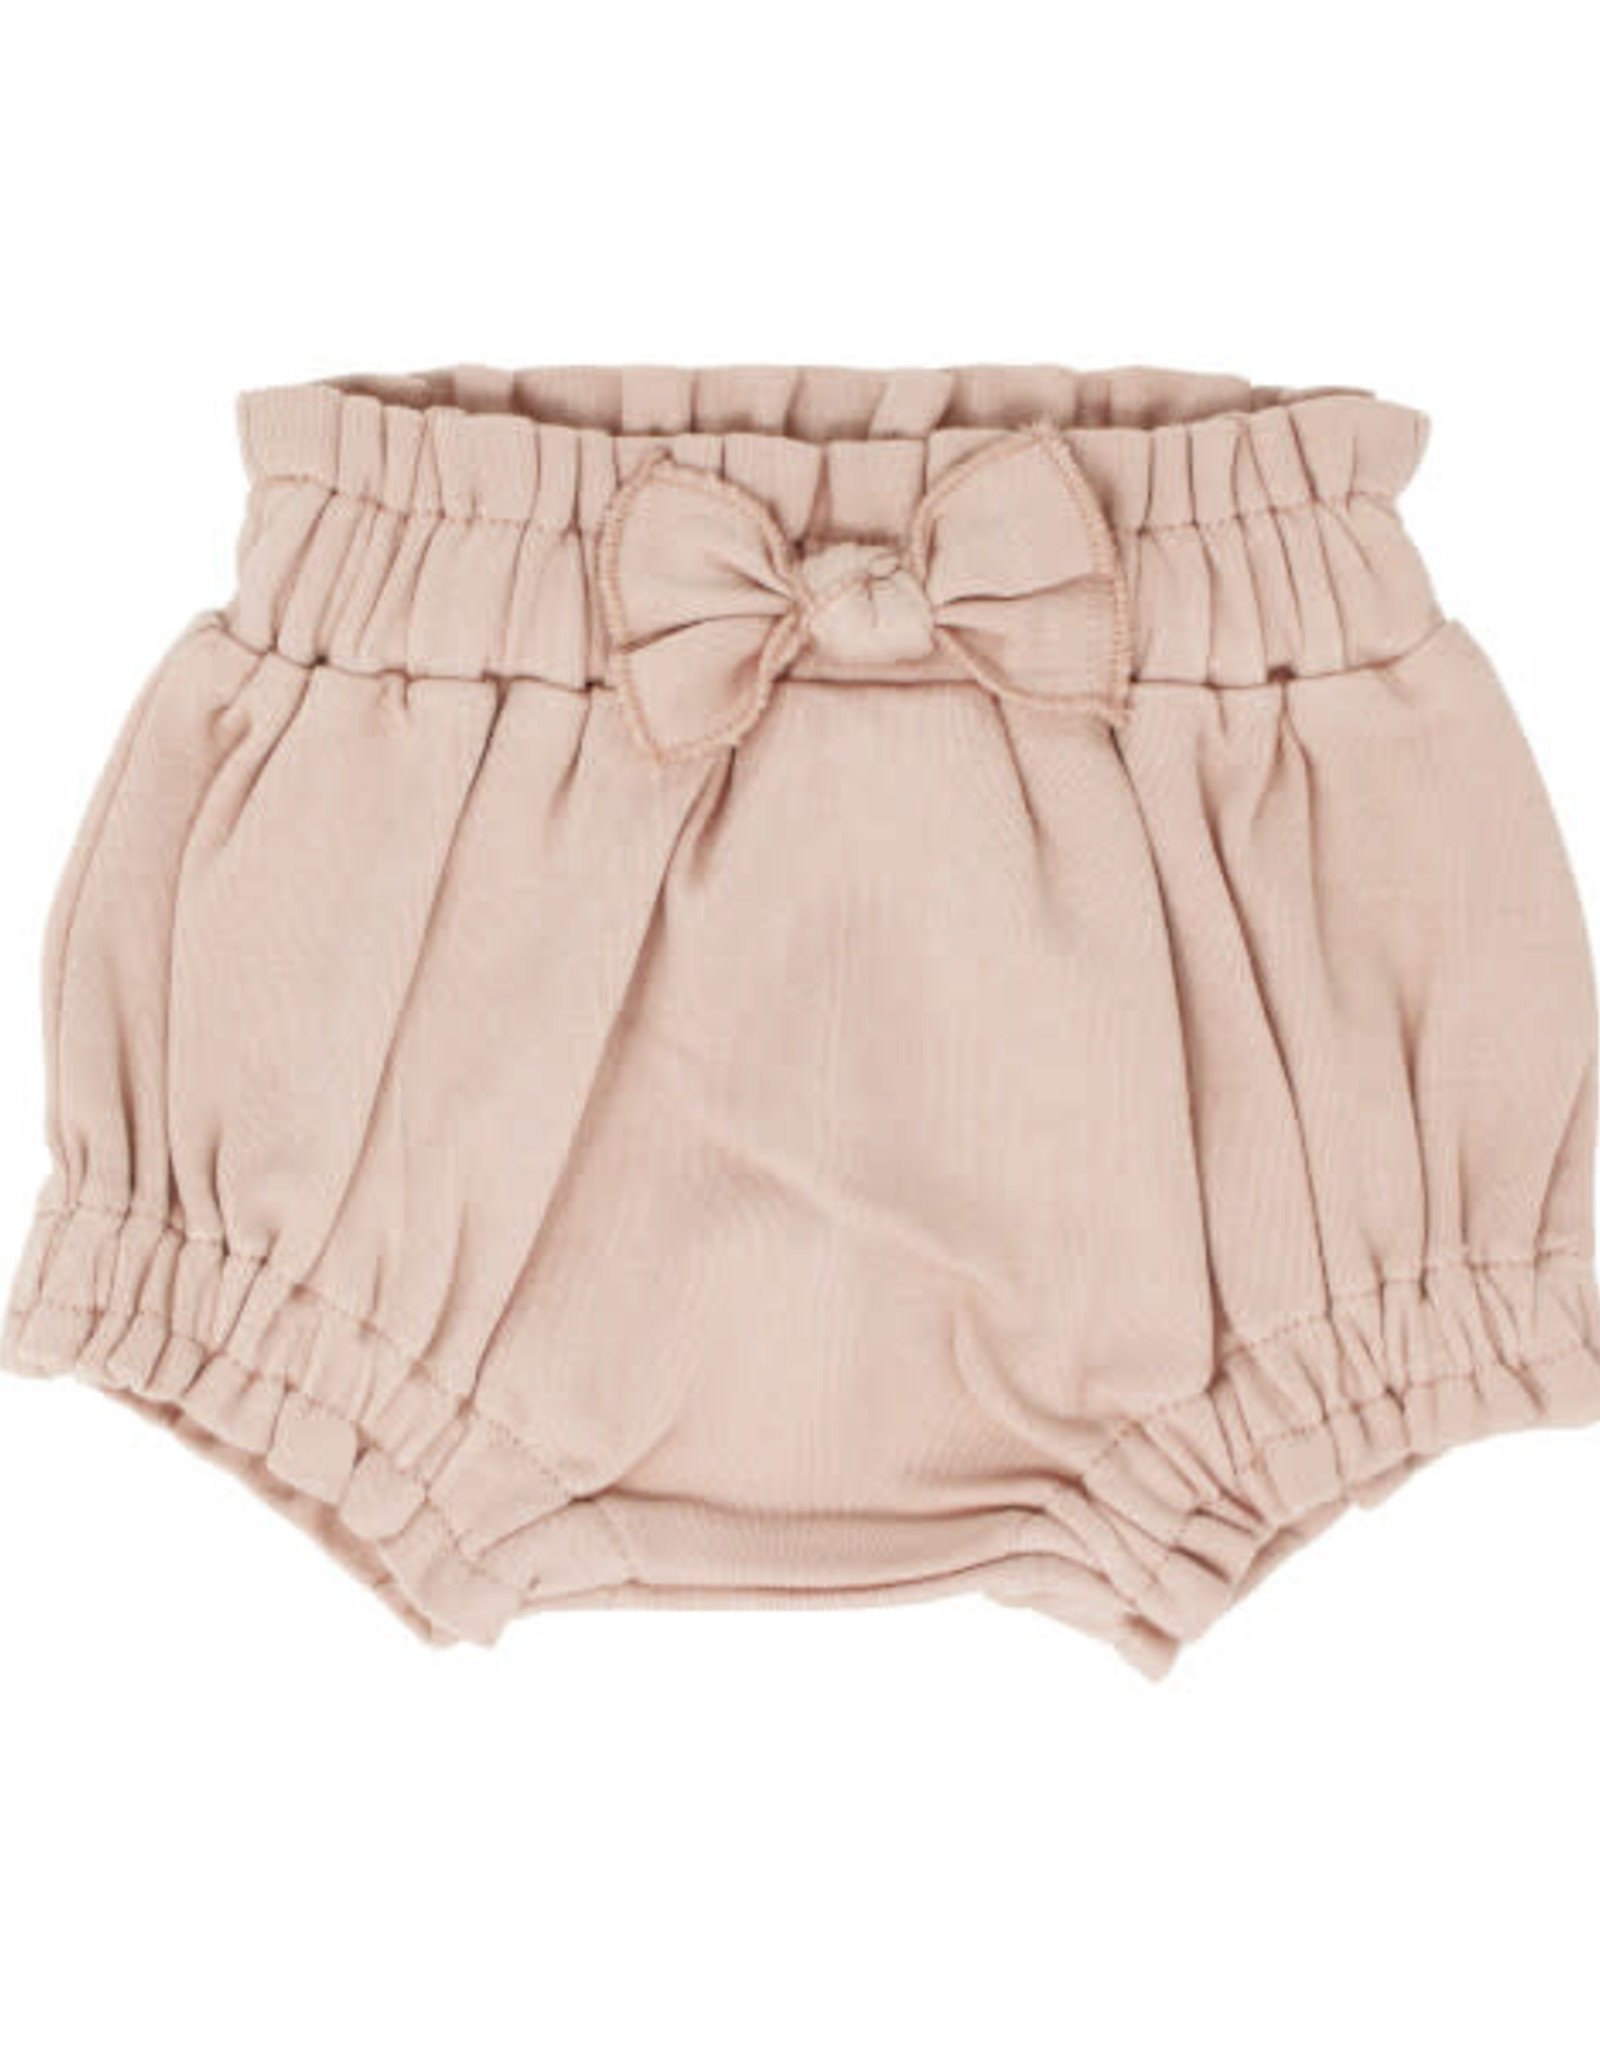 L'oved Baby Ruffle Bloomer Rosewater